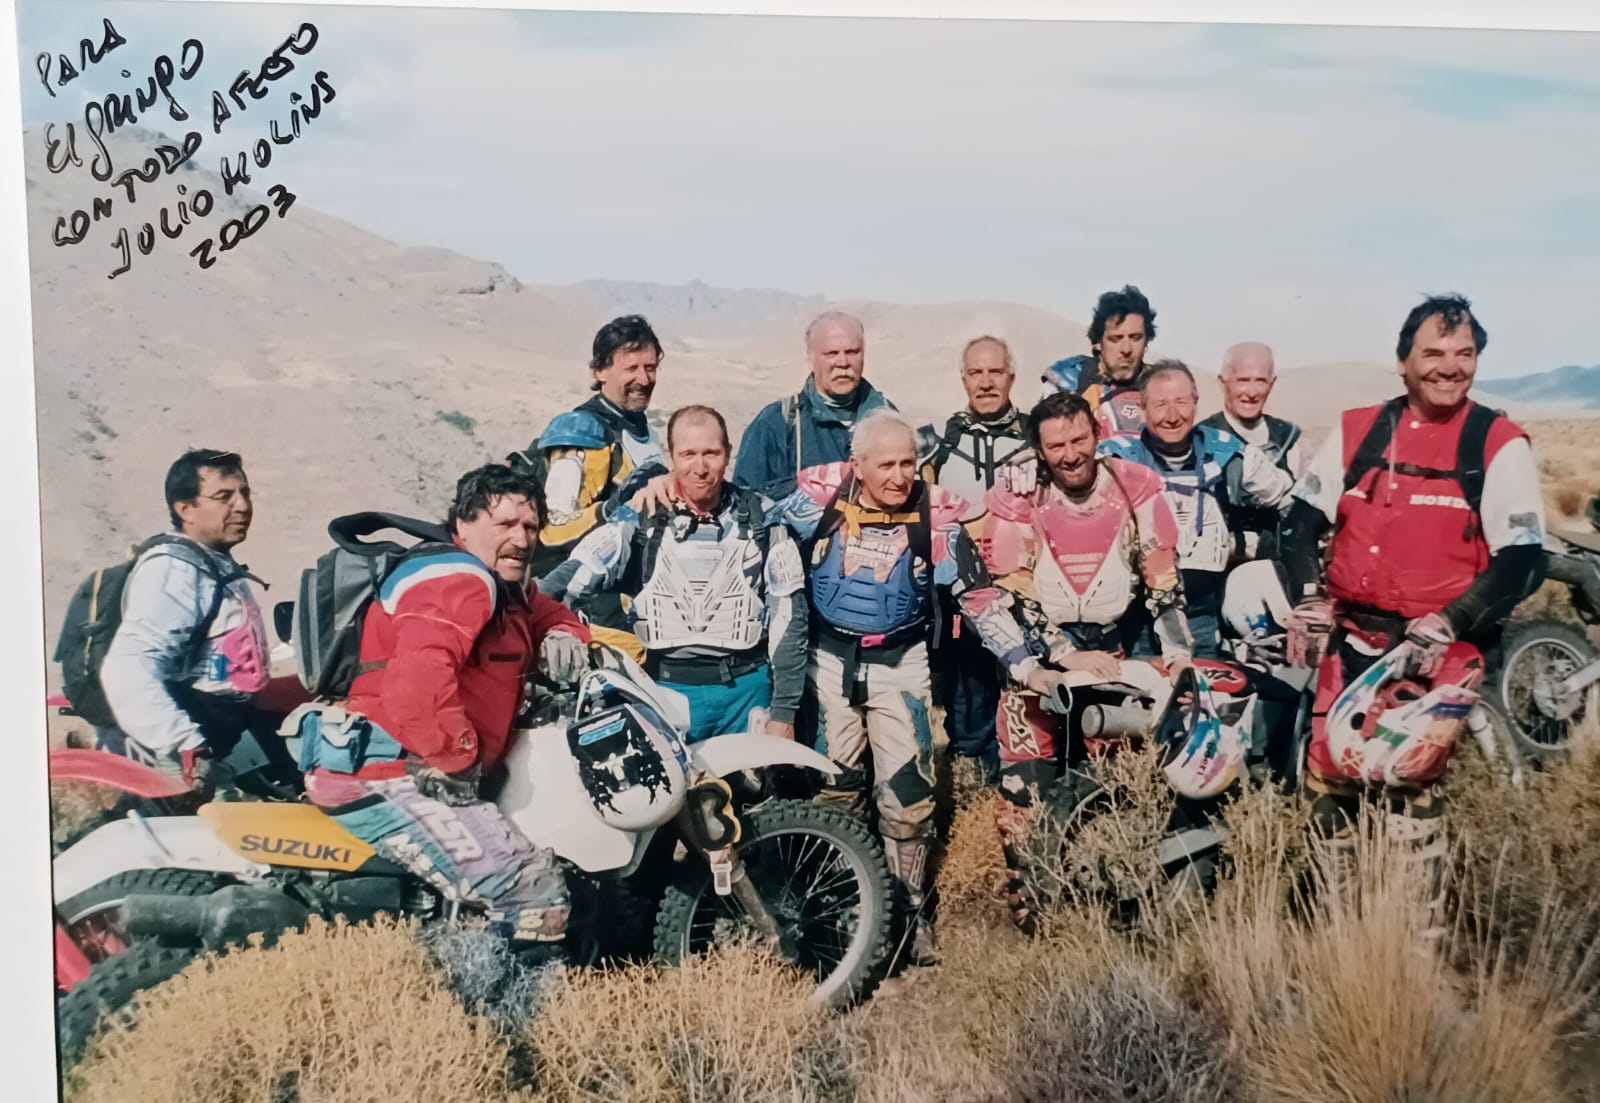 Carosanti on an adventure trip with his enduro motorcycle friends